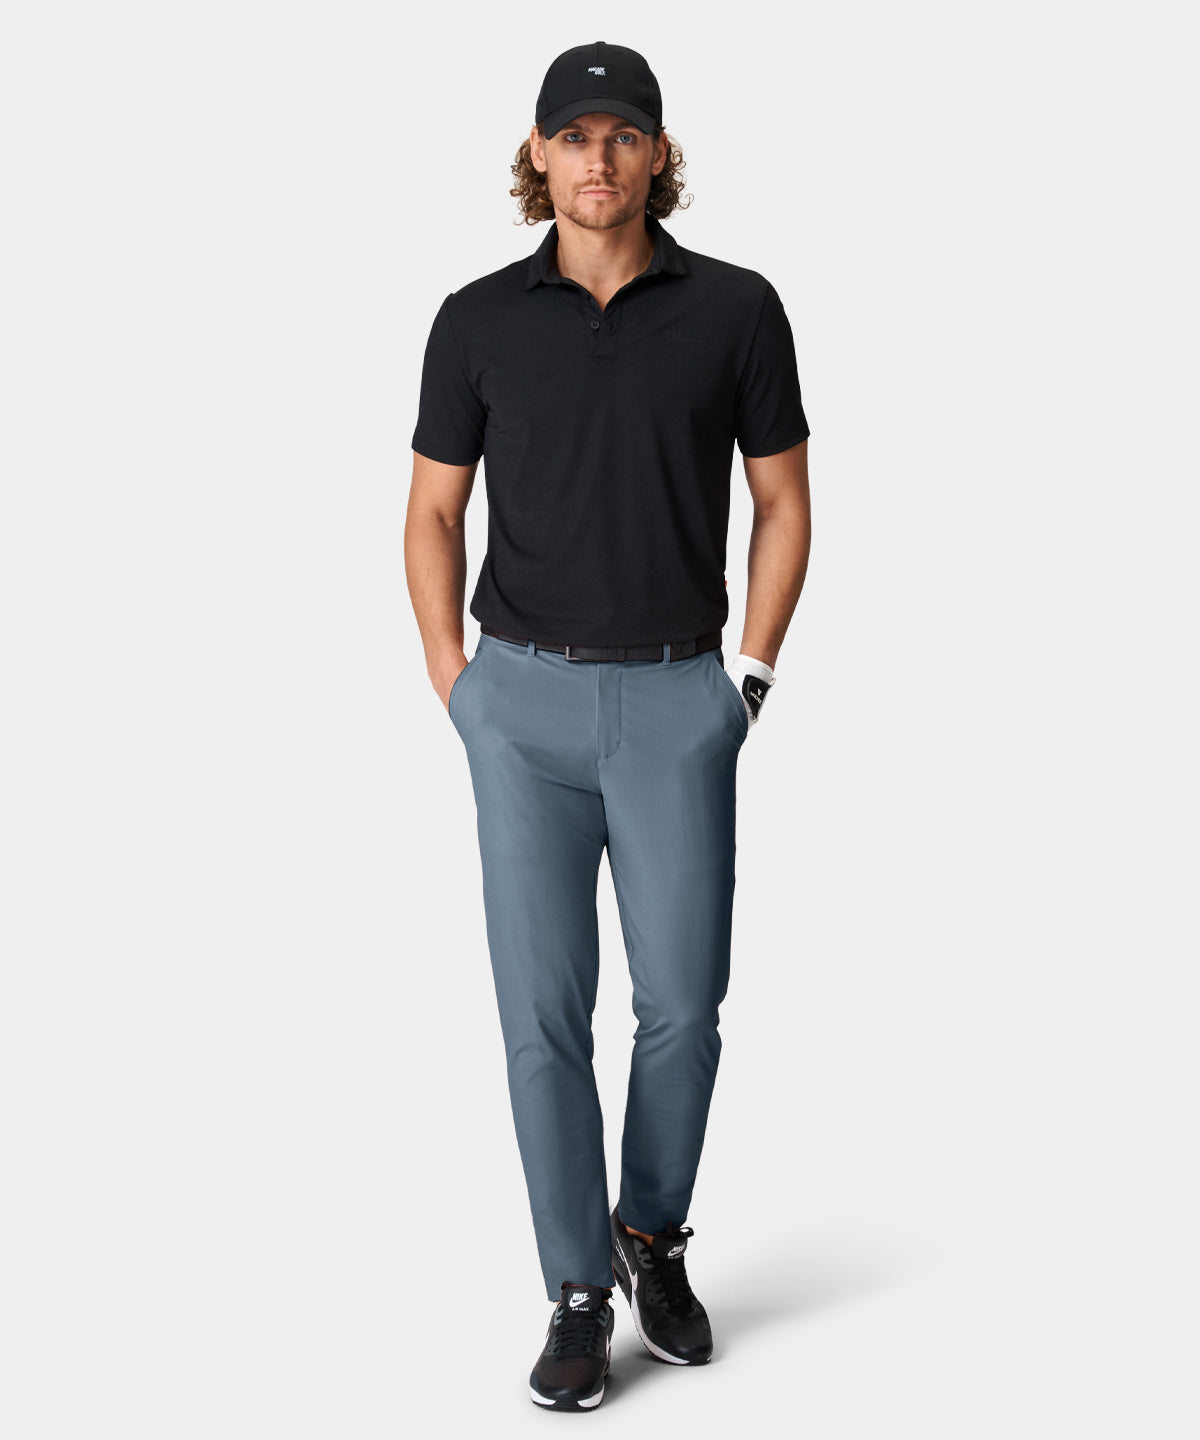 Buy Ted Baker Light Blue Trousers Online - 549911 | The Collective